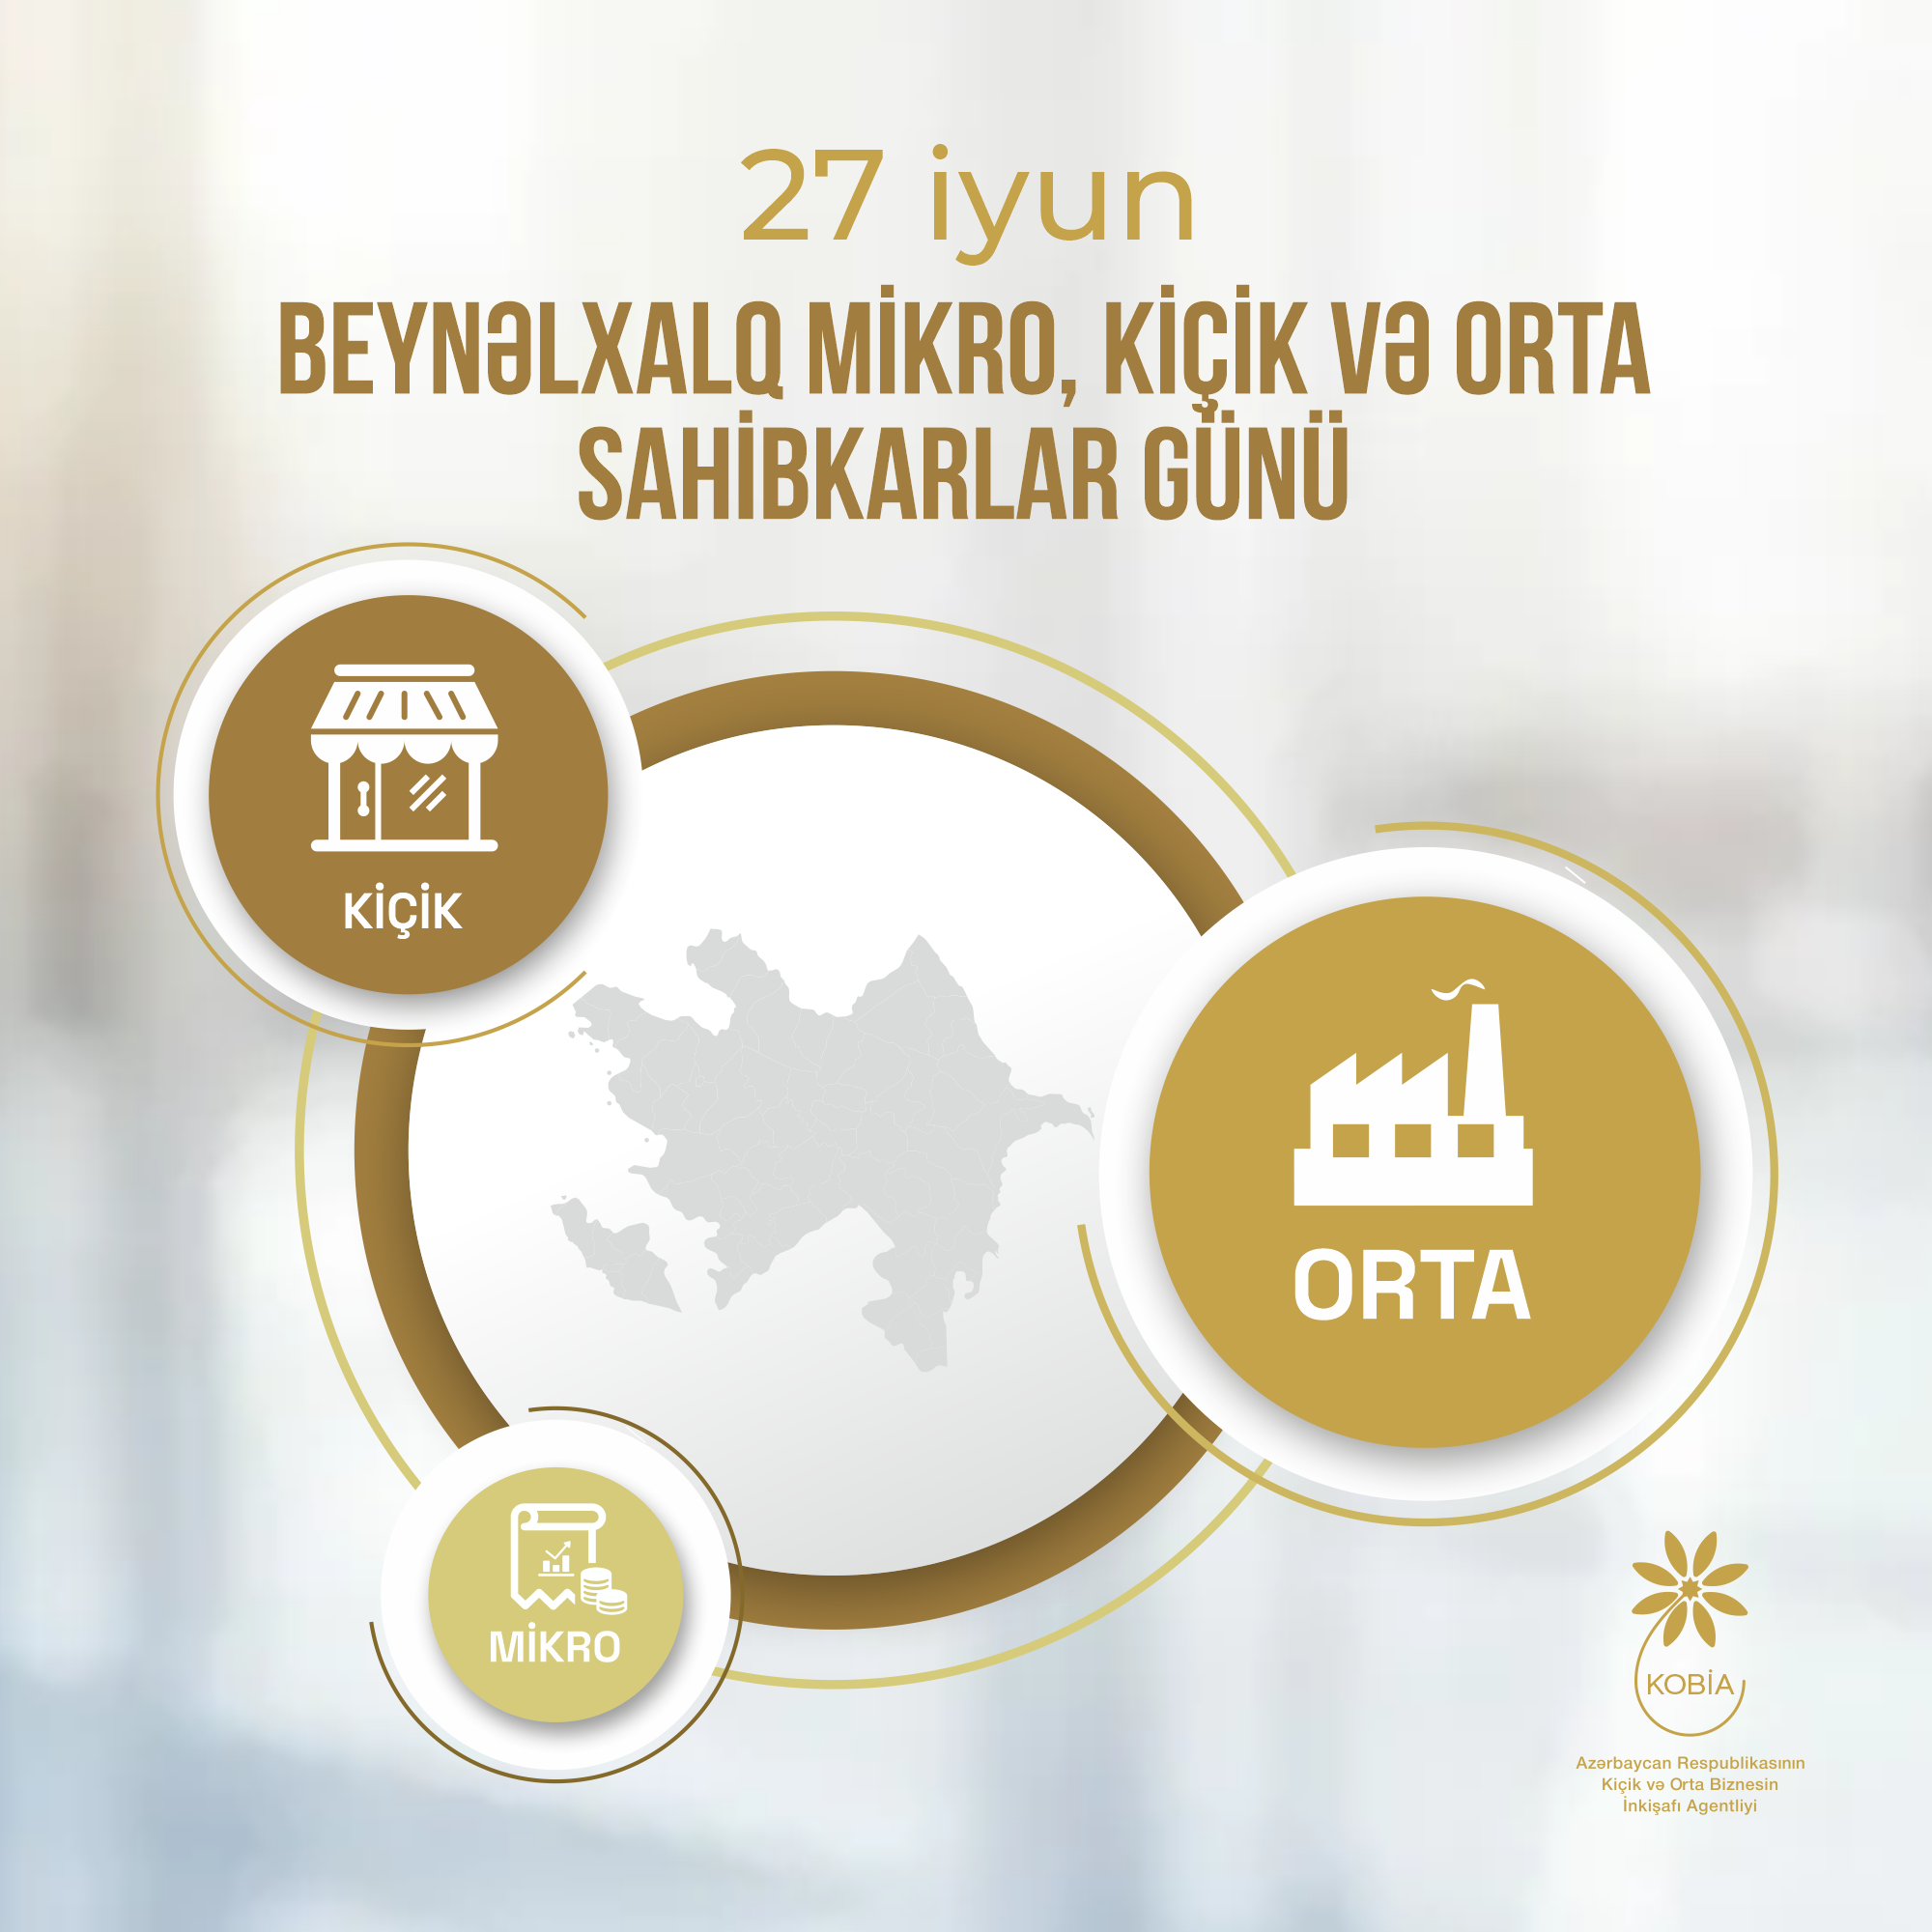 Today International Day of Micro, Small and Medium-sized Enterprises is marked 